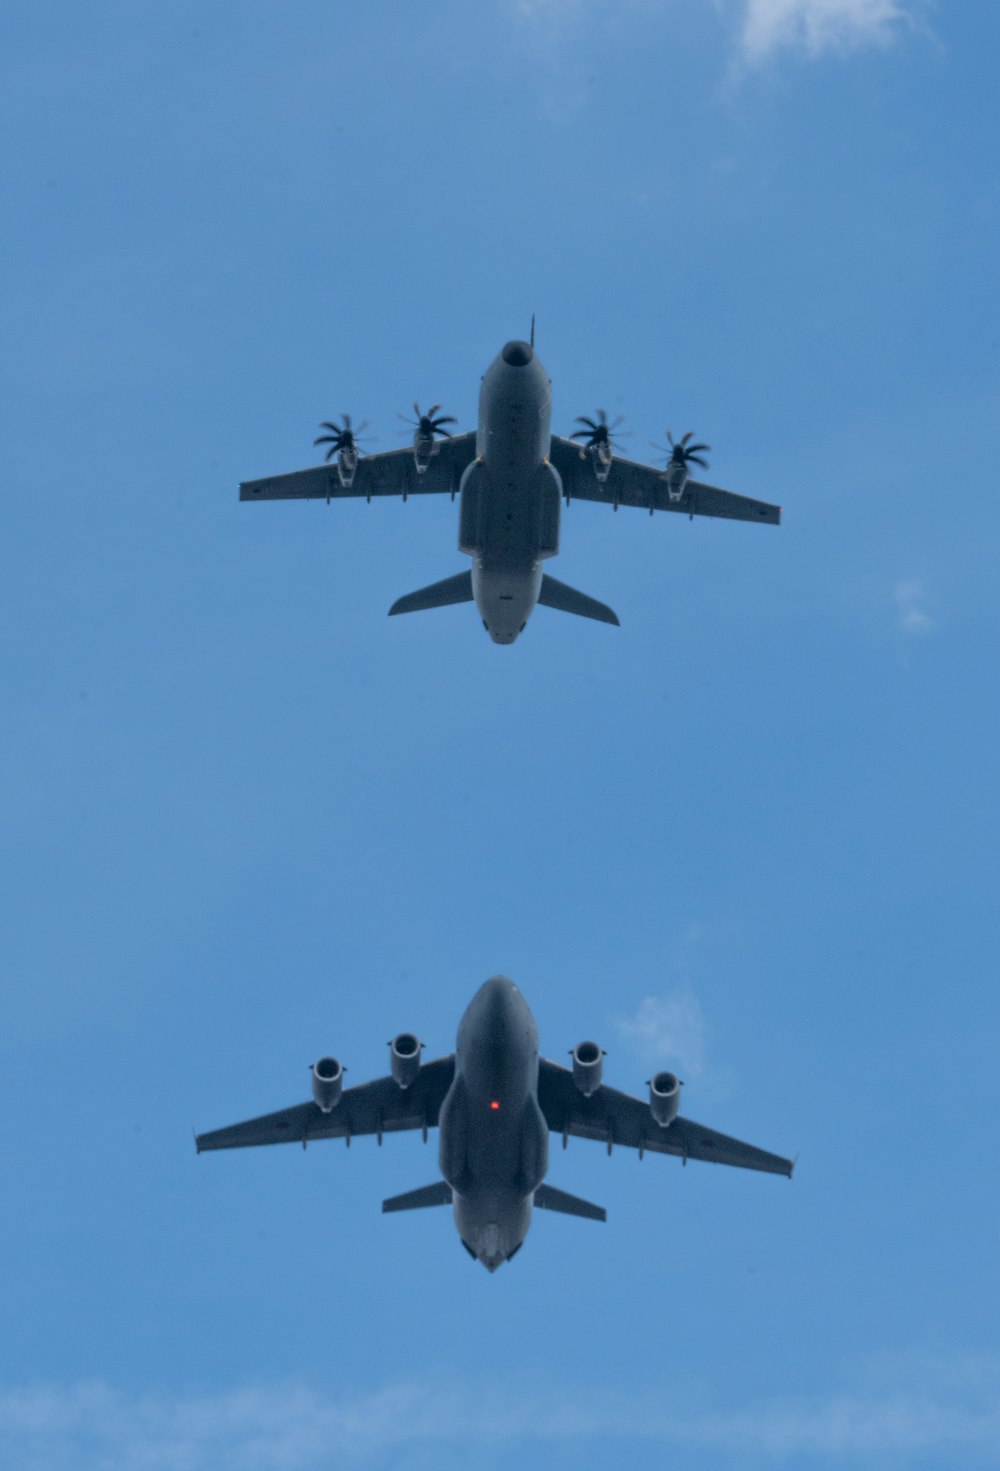 two planes flying in the air with a blue sky in the background